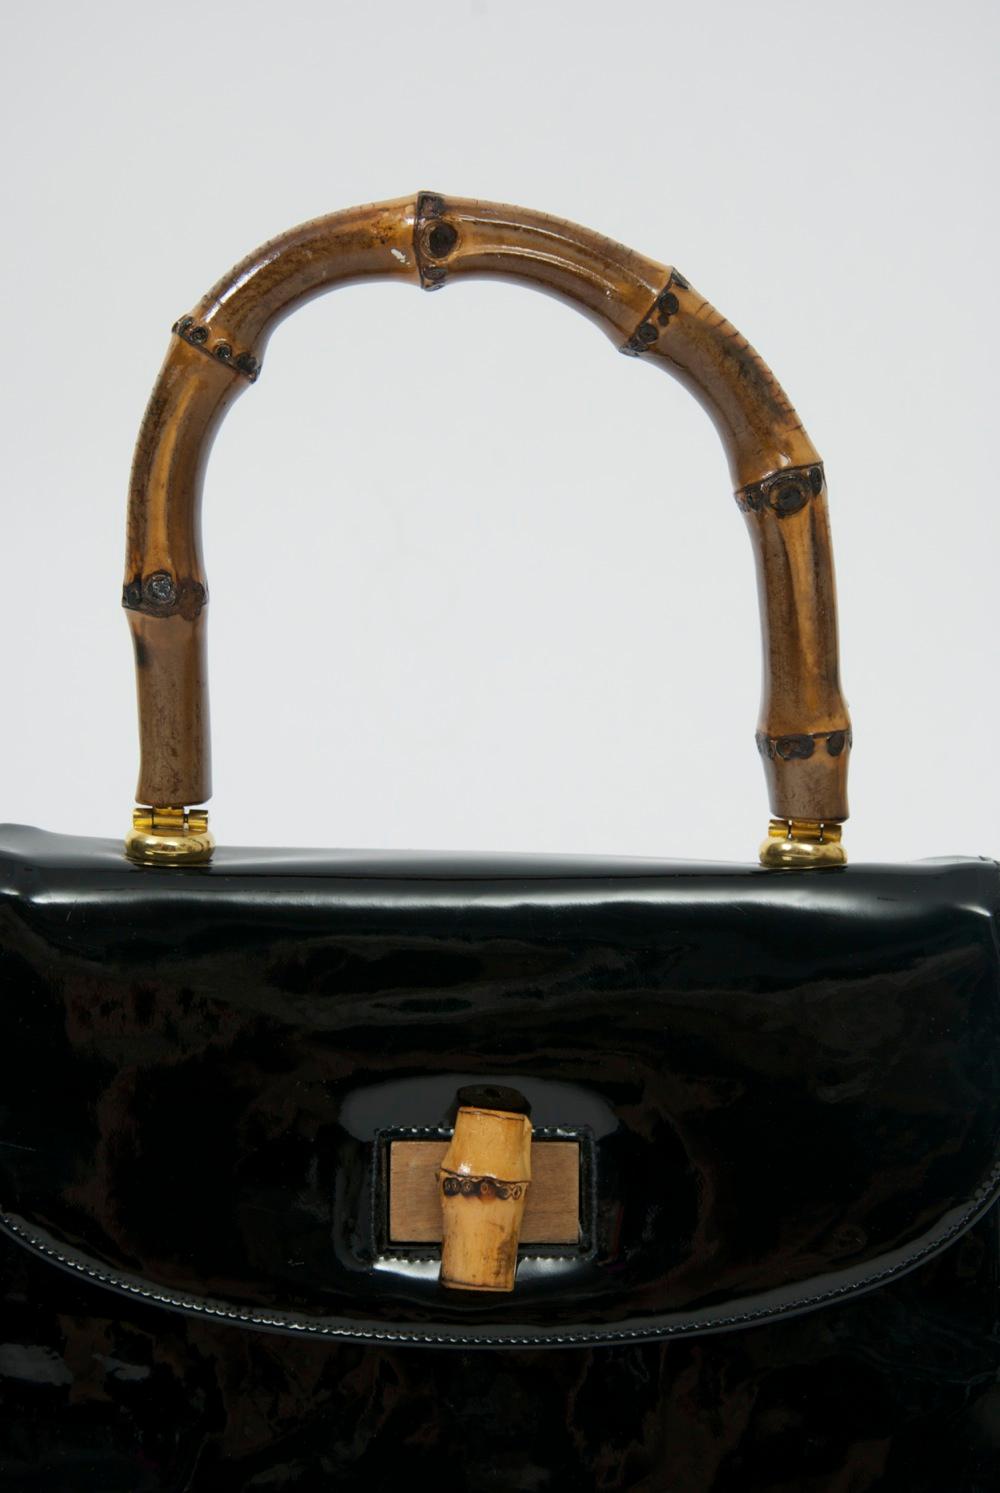 1960s black patent handbag with bamboo handle and clasp is a contemporary replica of a popular Gucci style from the mid twentieth century. Very well made, the red interior is divided into two with two zippered compartments - one in the center and